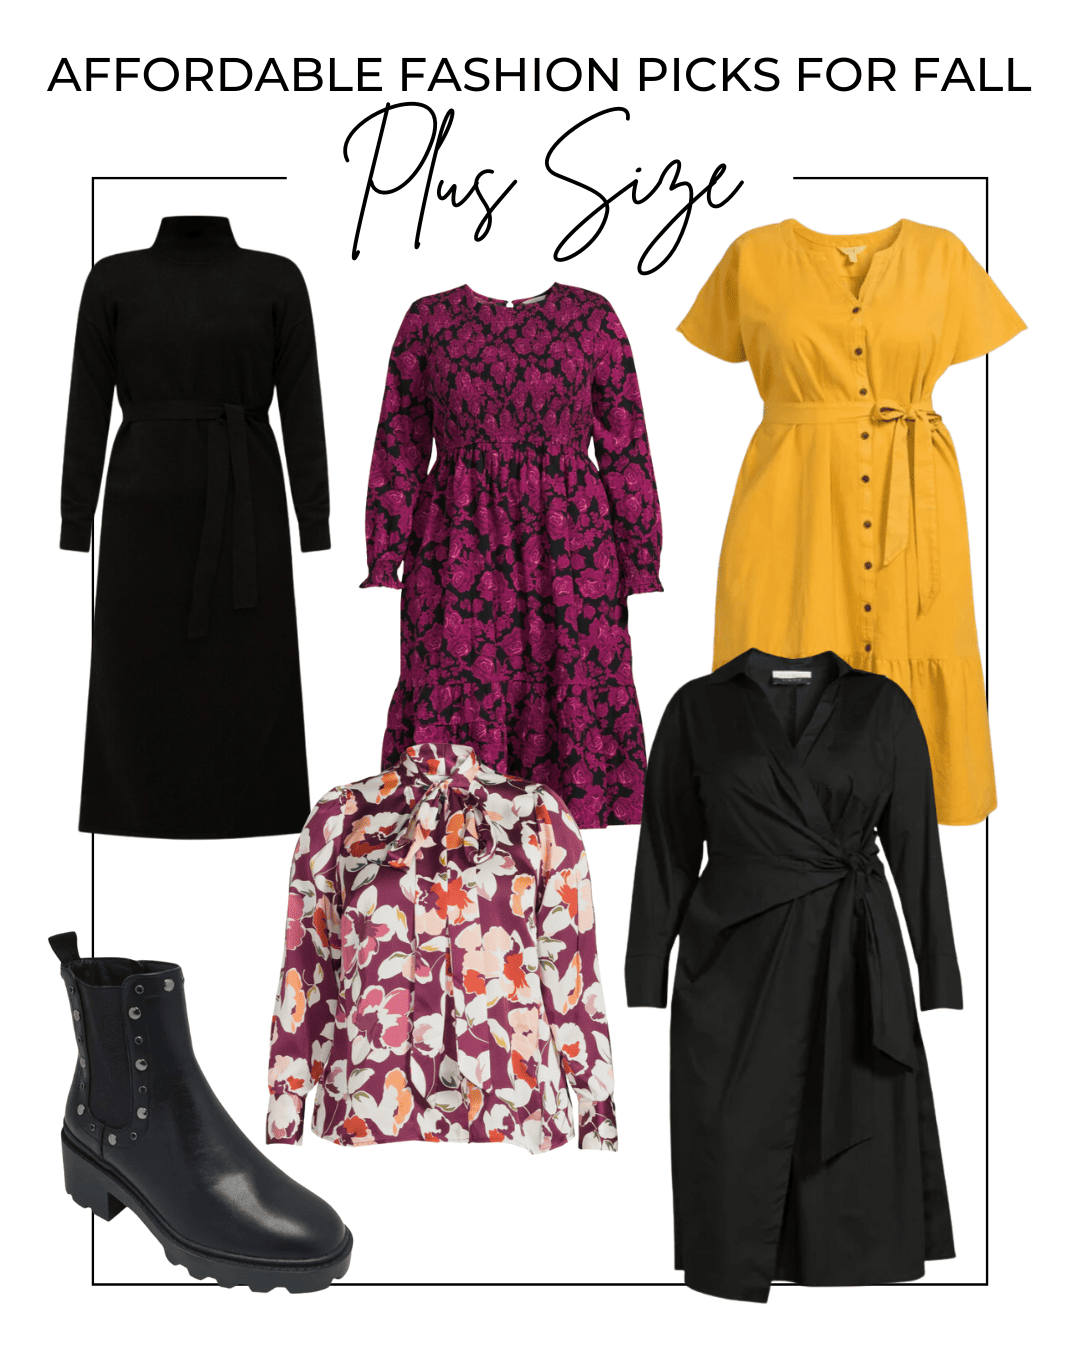 Collage image featuring plus size yellow dress, floral midi dress, black sweater dress, blouse and boots with a title that says "Affordable Fashion Picks For Fall Plus Sizes Finds!"